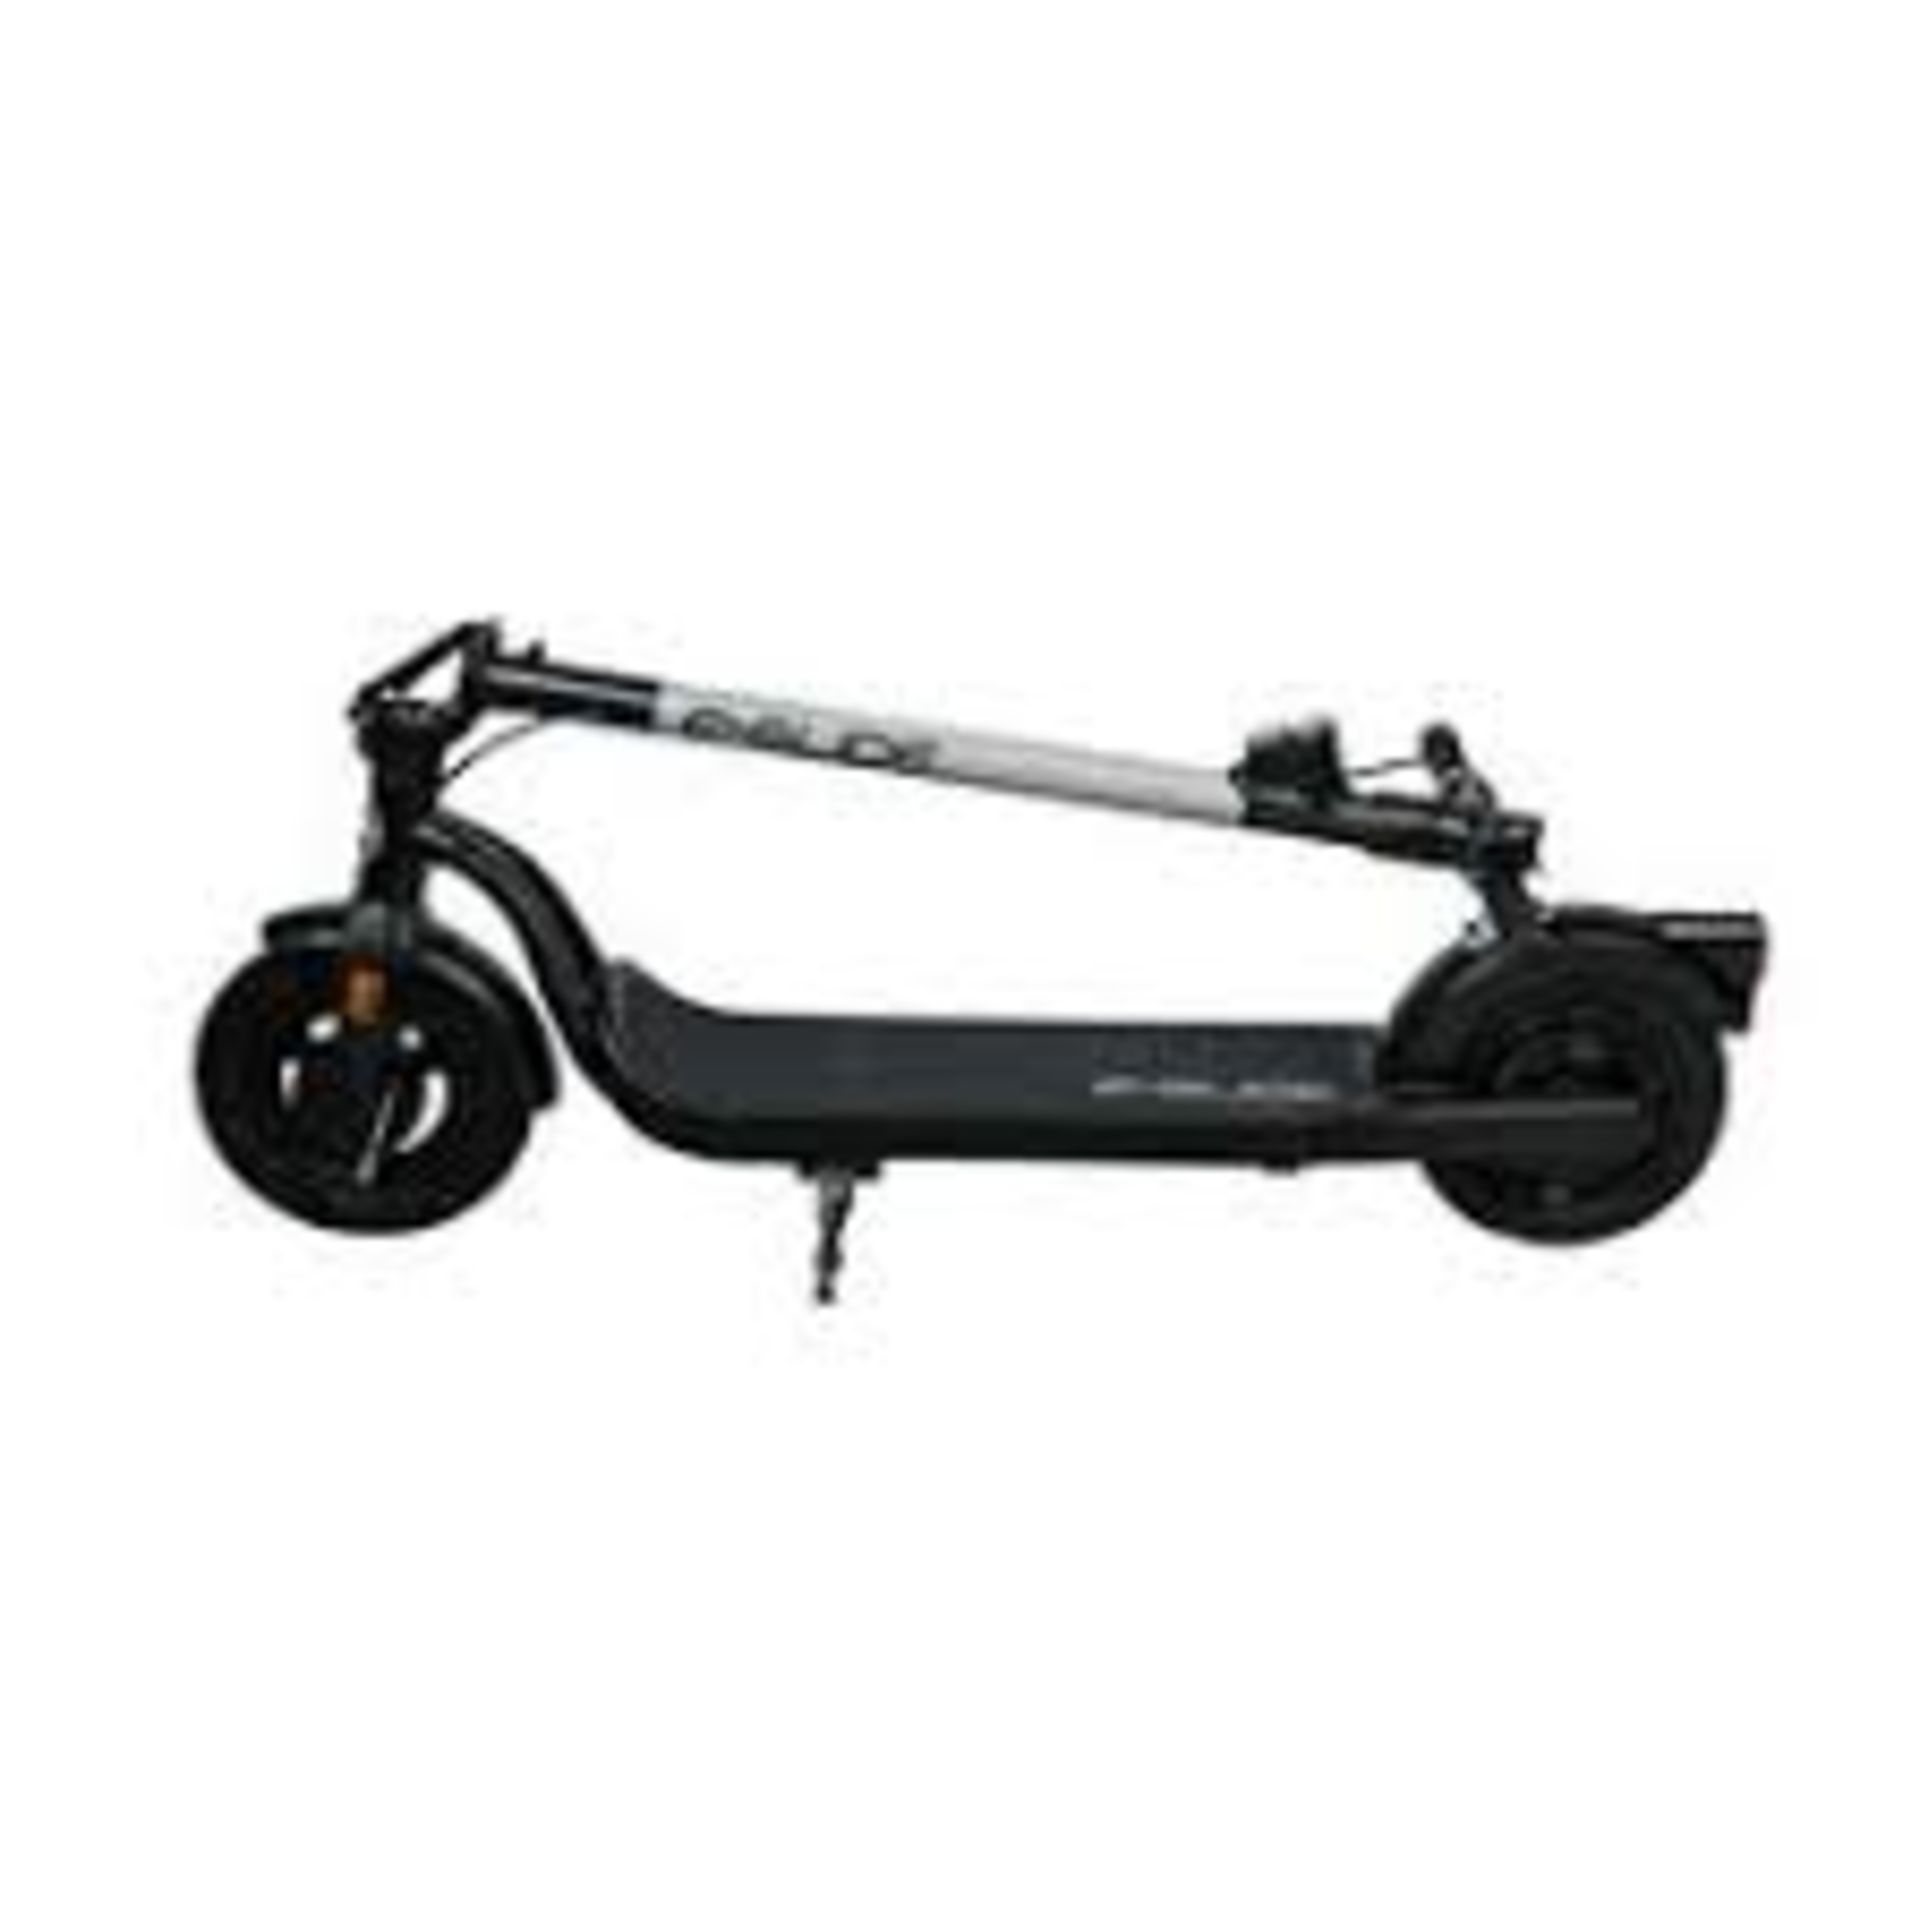 Trade Lot 4 x Brand New E-Glide V2 Electric Scooter Grey and Black RRP £599, Introducing a sleek and - Image 2 of 2